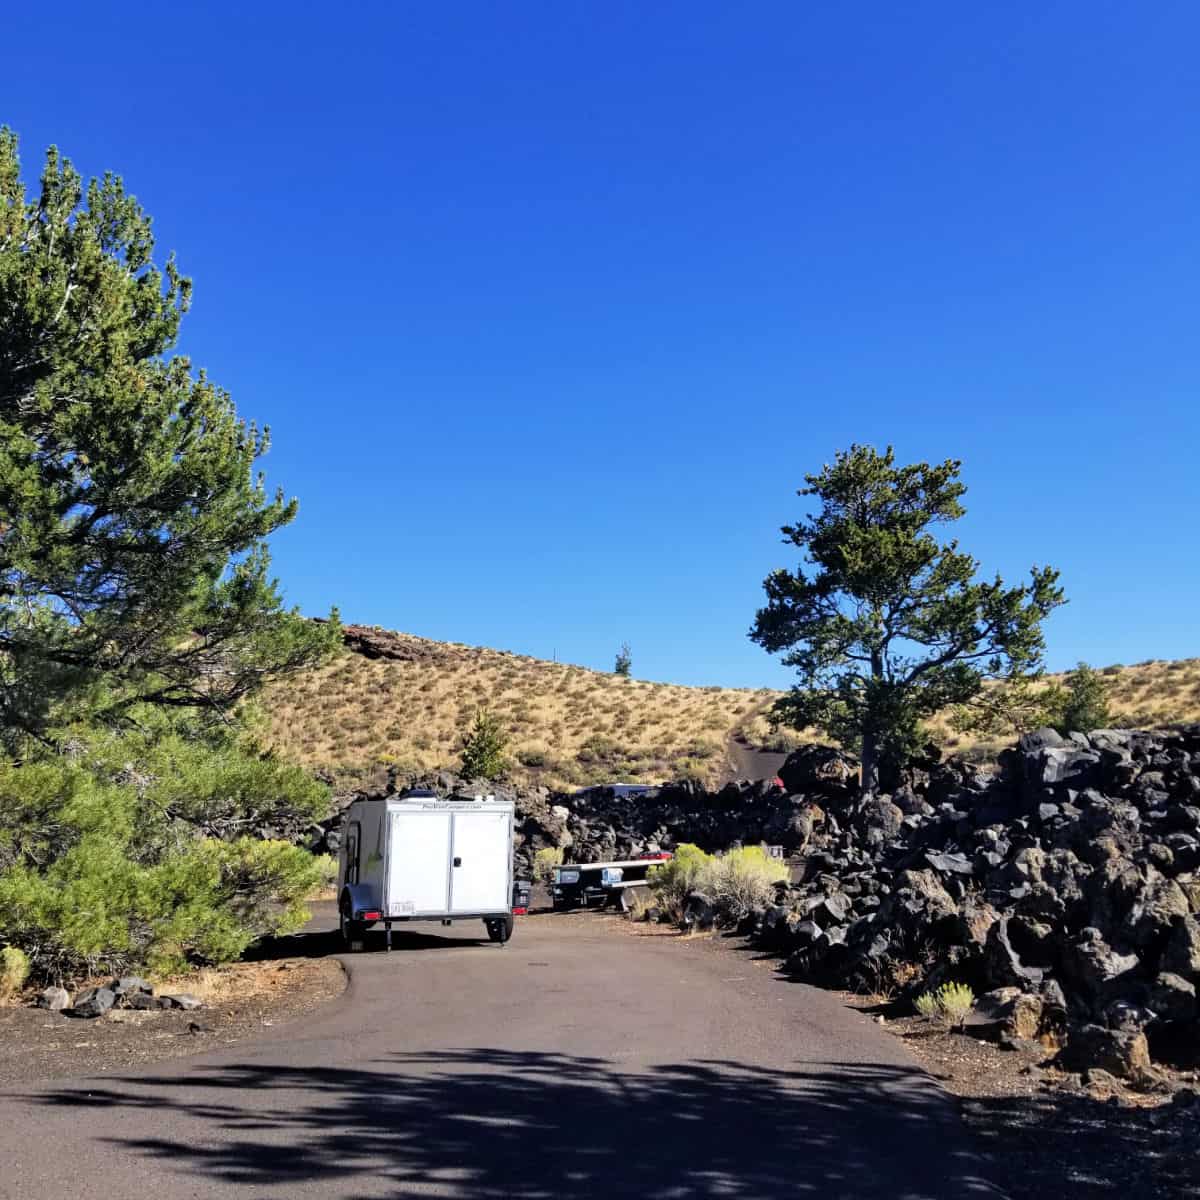 Campsite in Lava Flow Campground Craters of the Moon National Monument